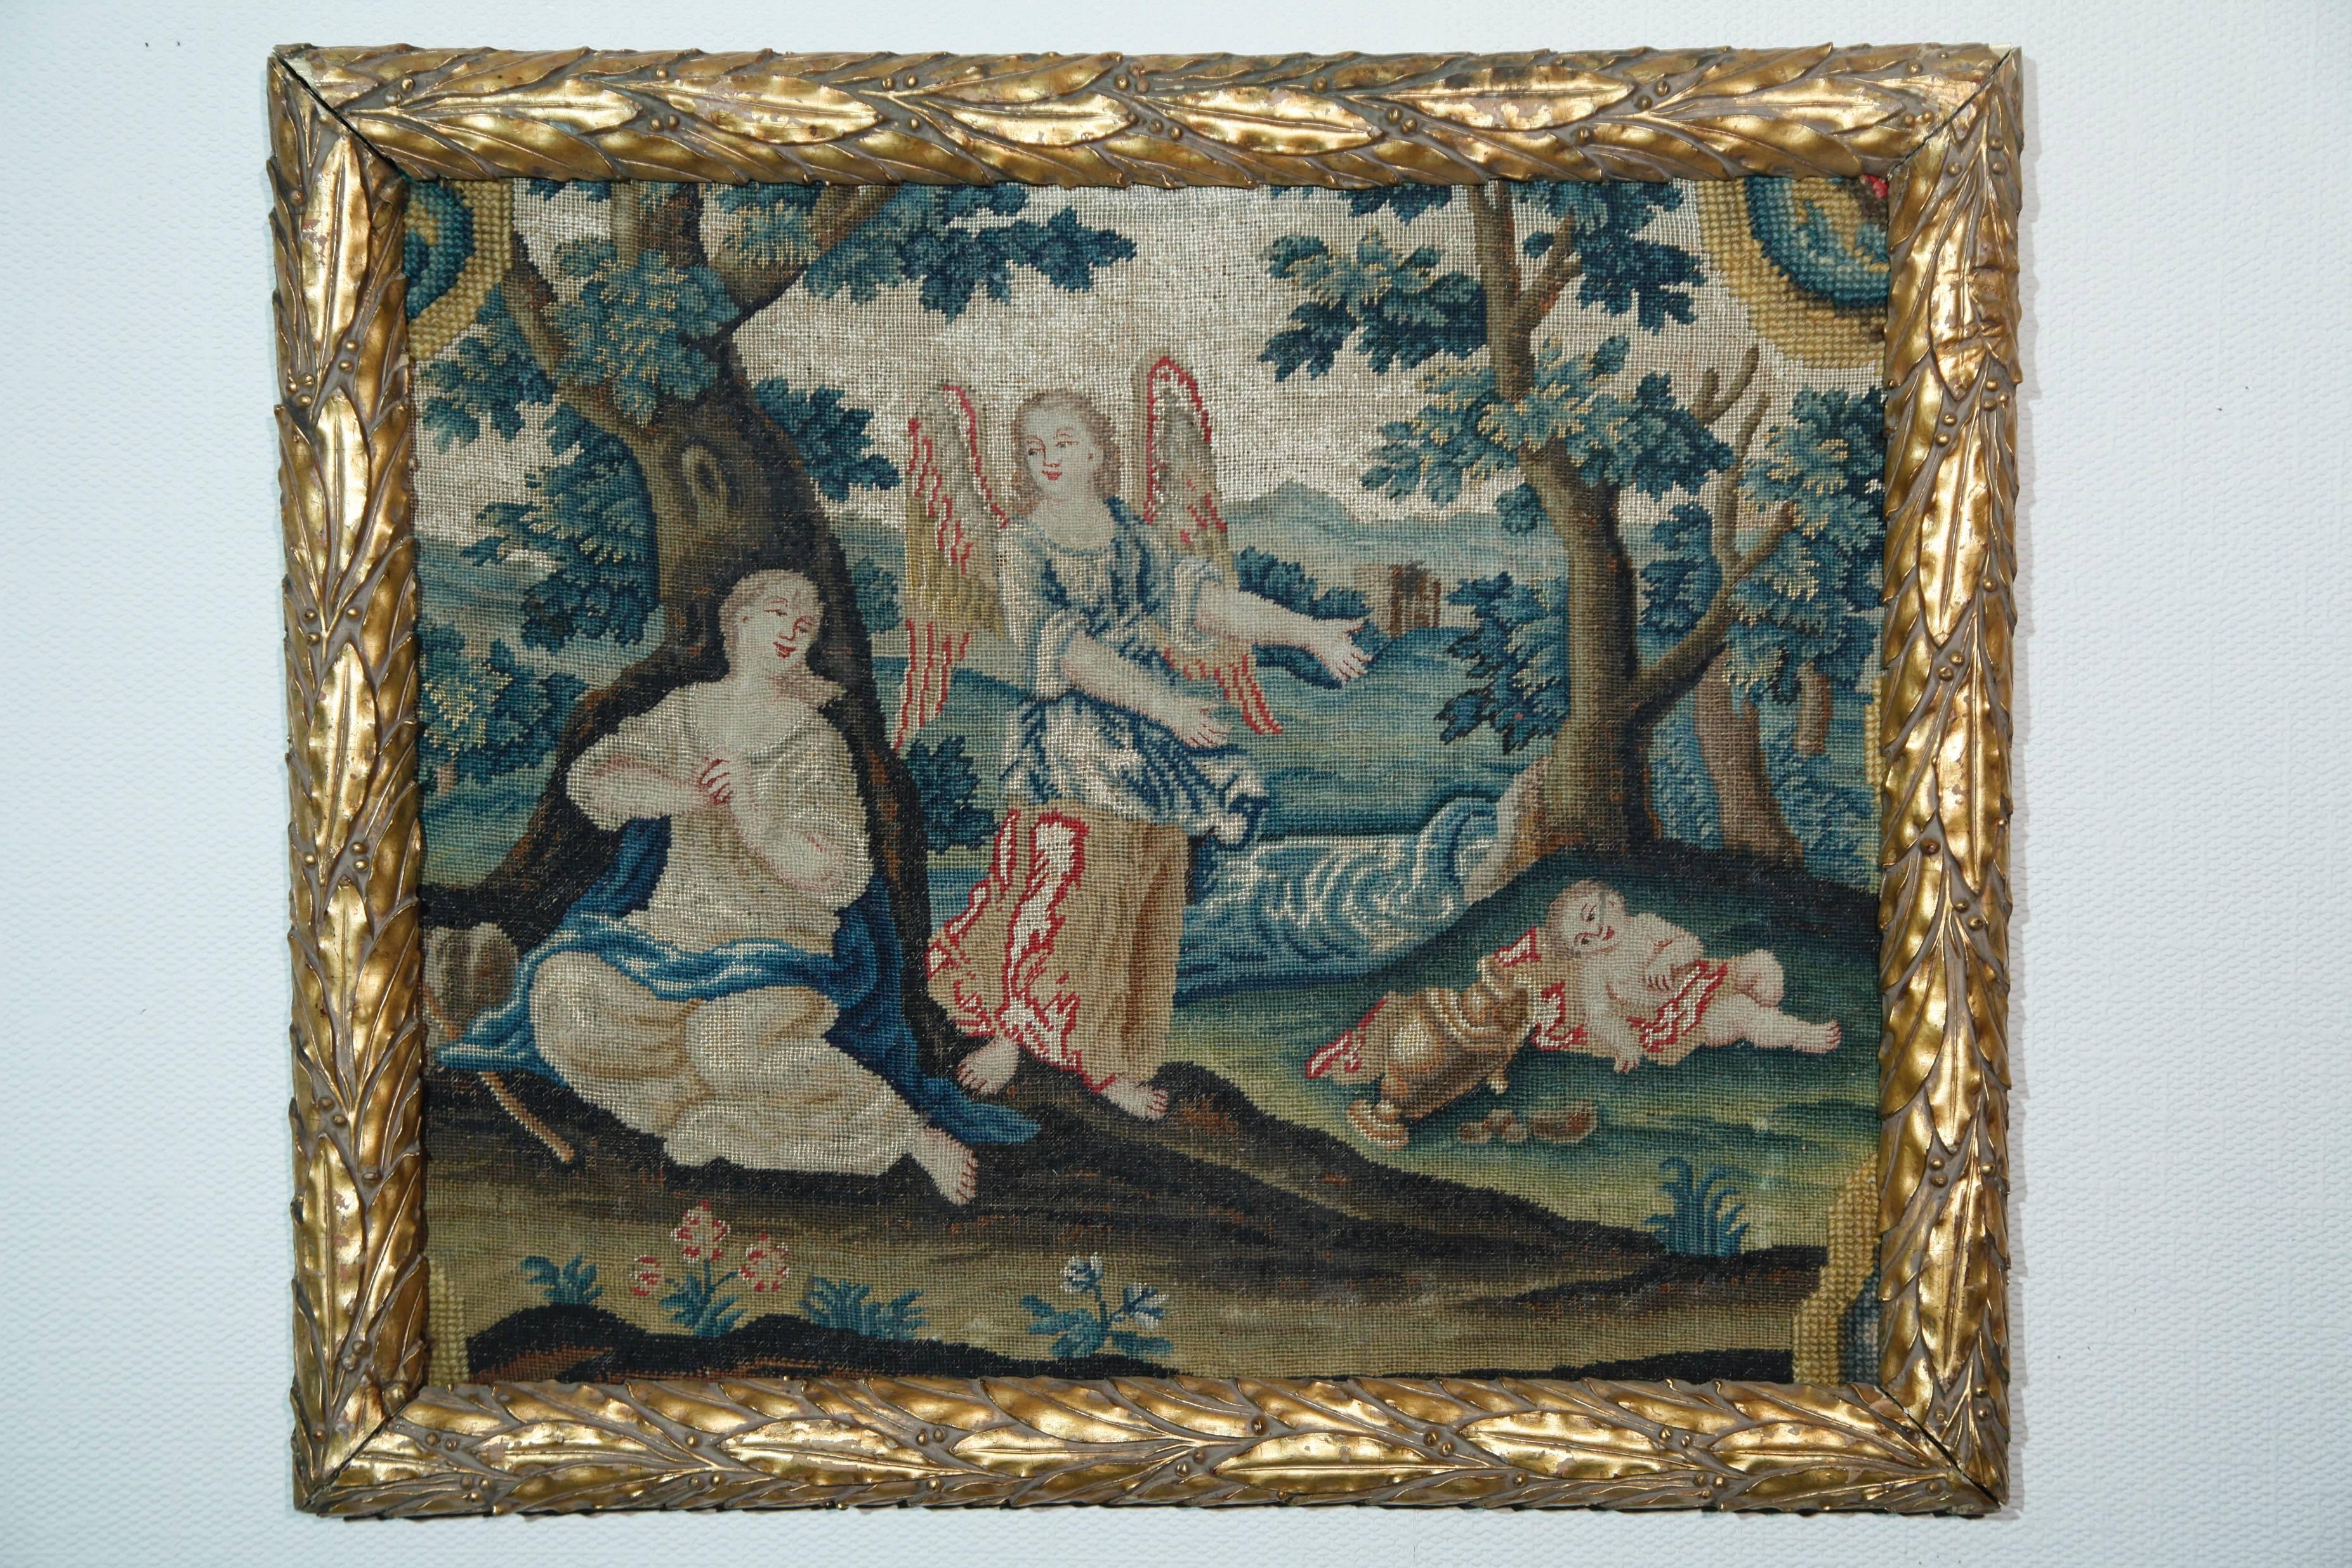 A pair of very fine needlepoint, worked in colored silks and wool, with raised faces and the field worked with trees, animals, river. Framed size 53 x 45 cm, circa 1900.